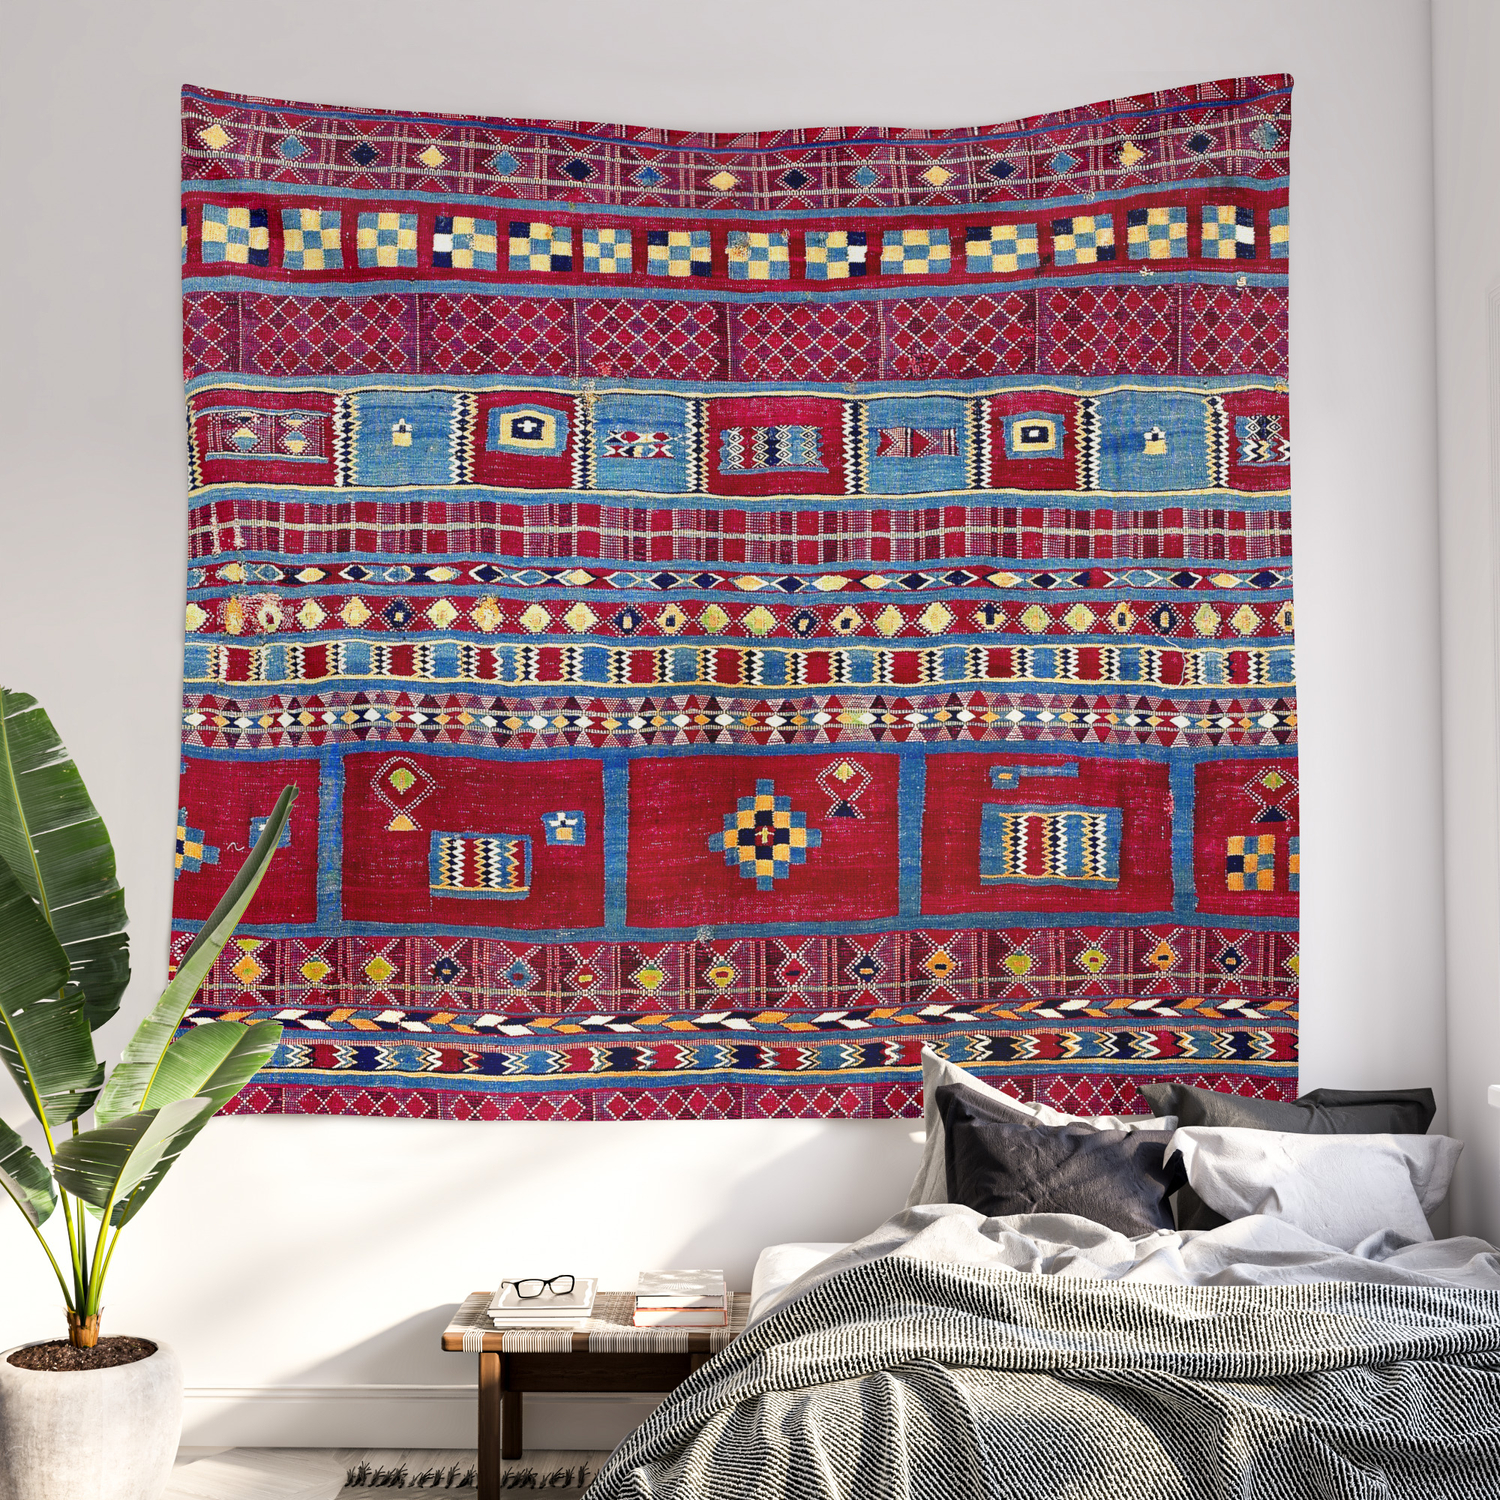 Tapestry Throw Blanket Rugs Ethnic Tribal Cotton Wall Hangings Geometric Indian 